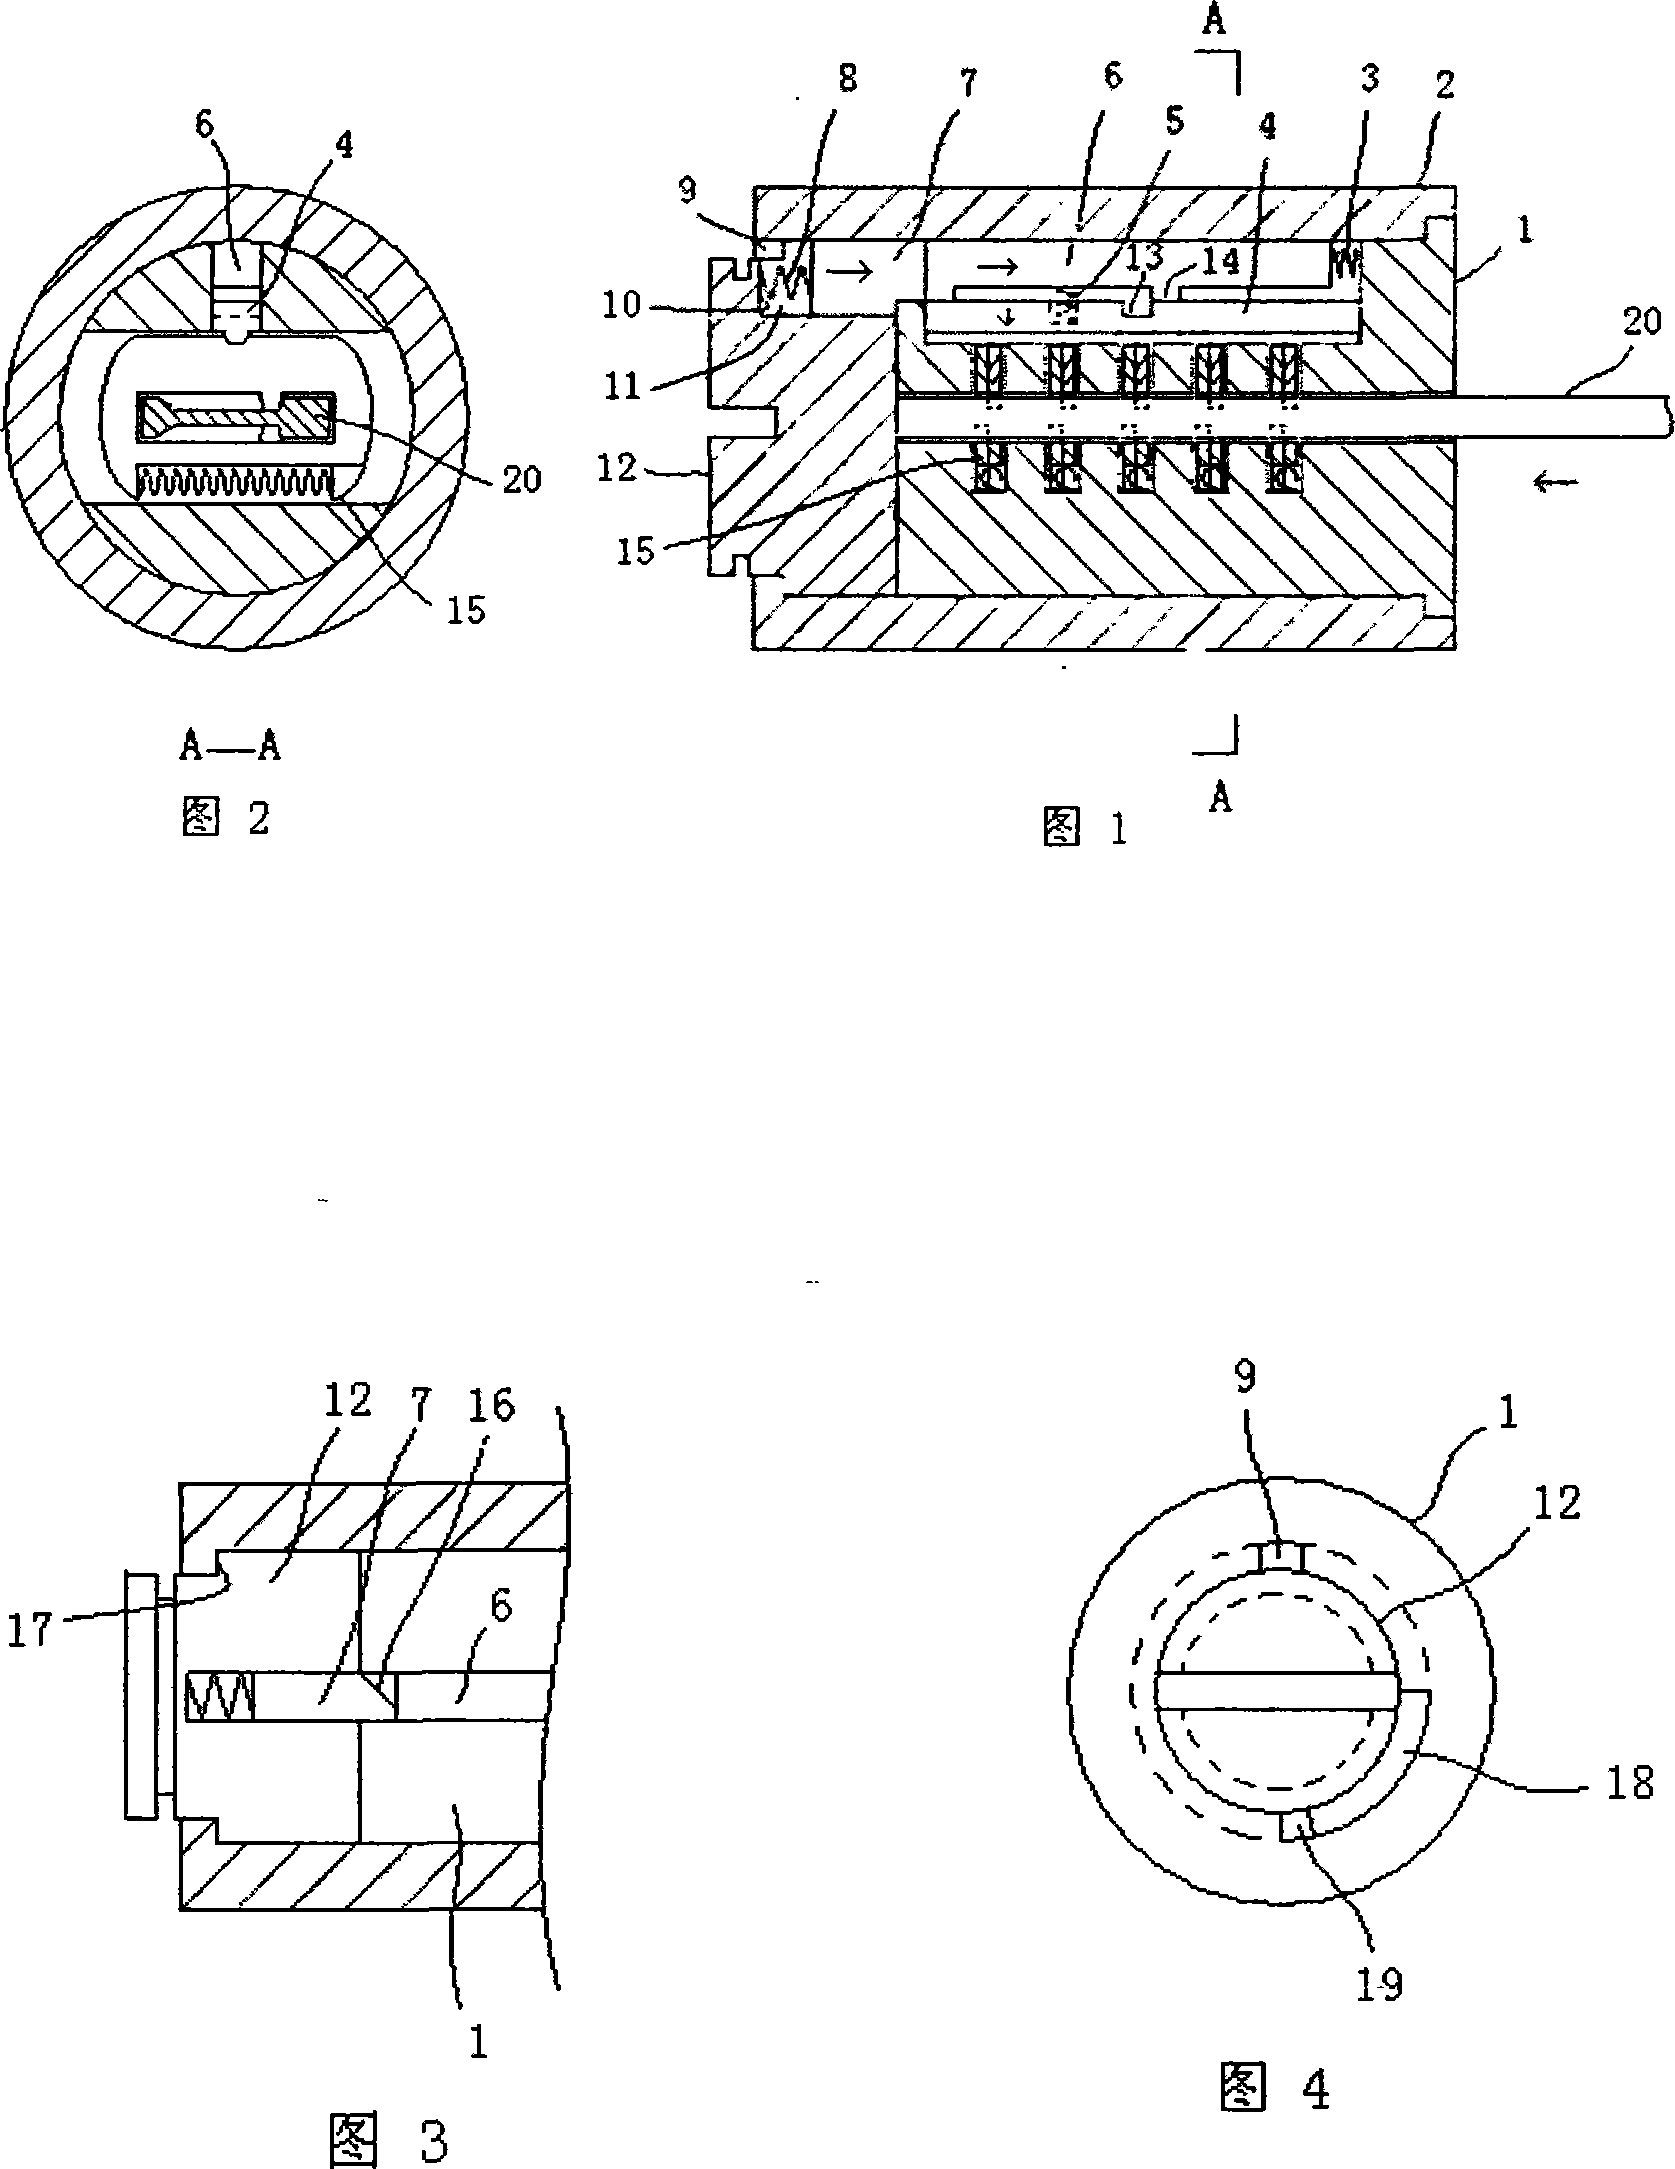 Anti-theft impeller vane lock with idle run core structure